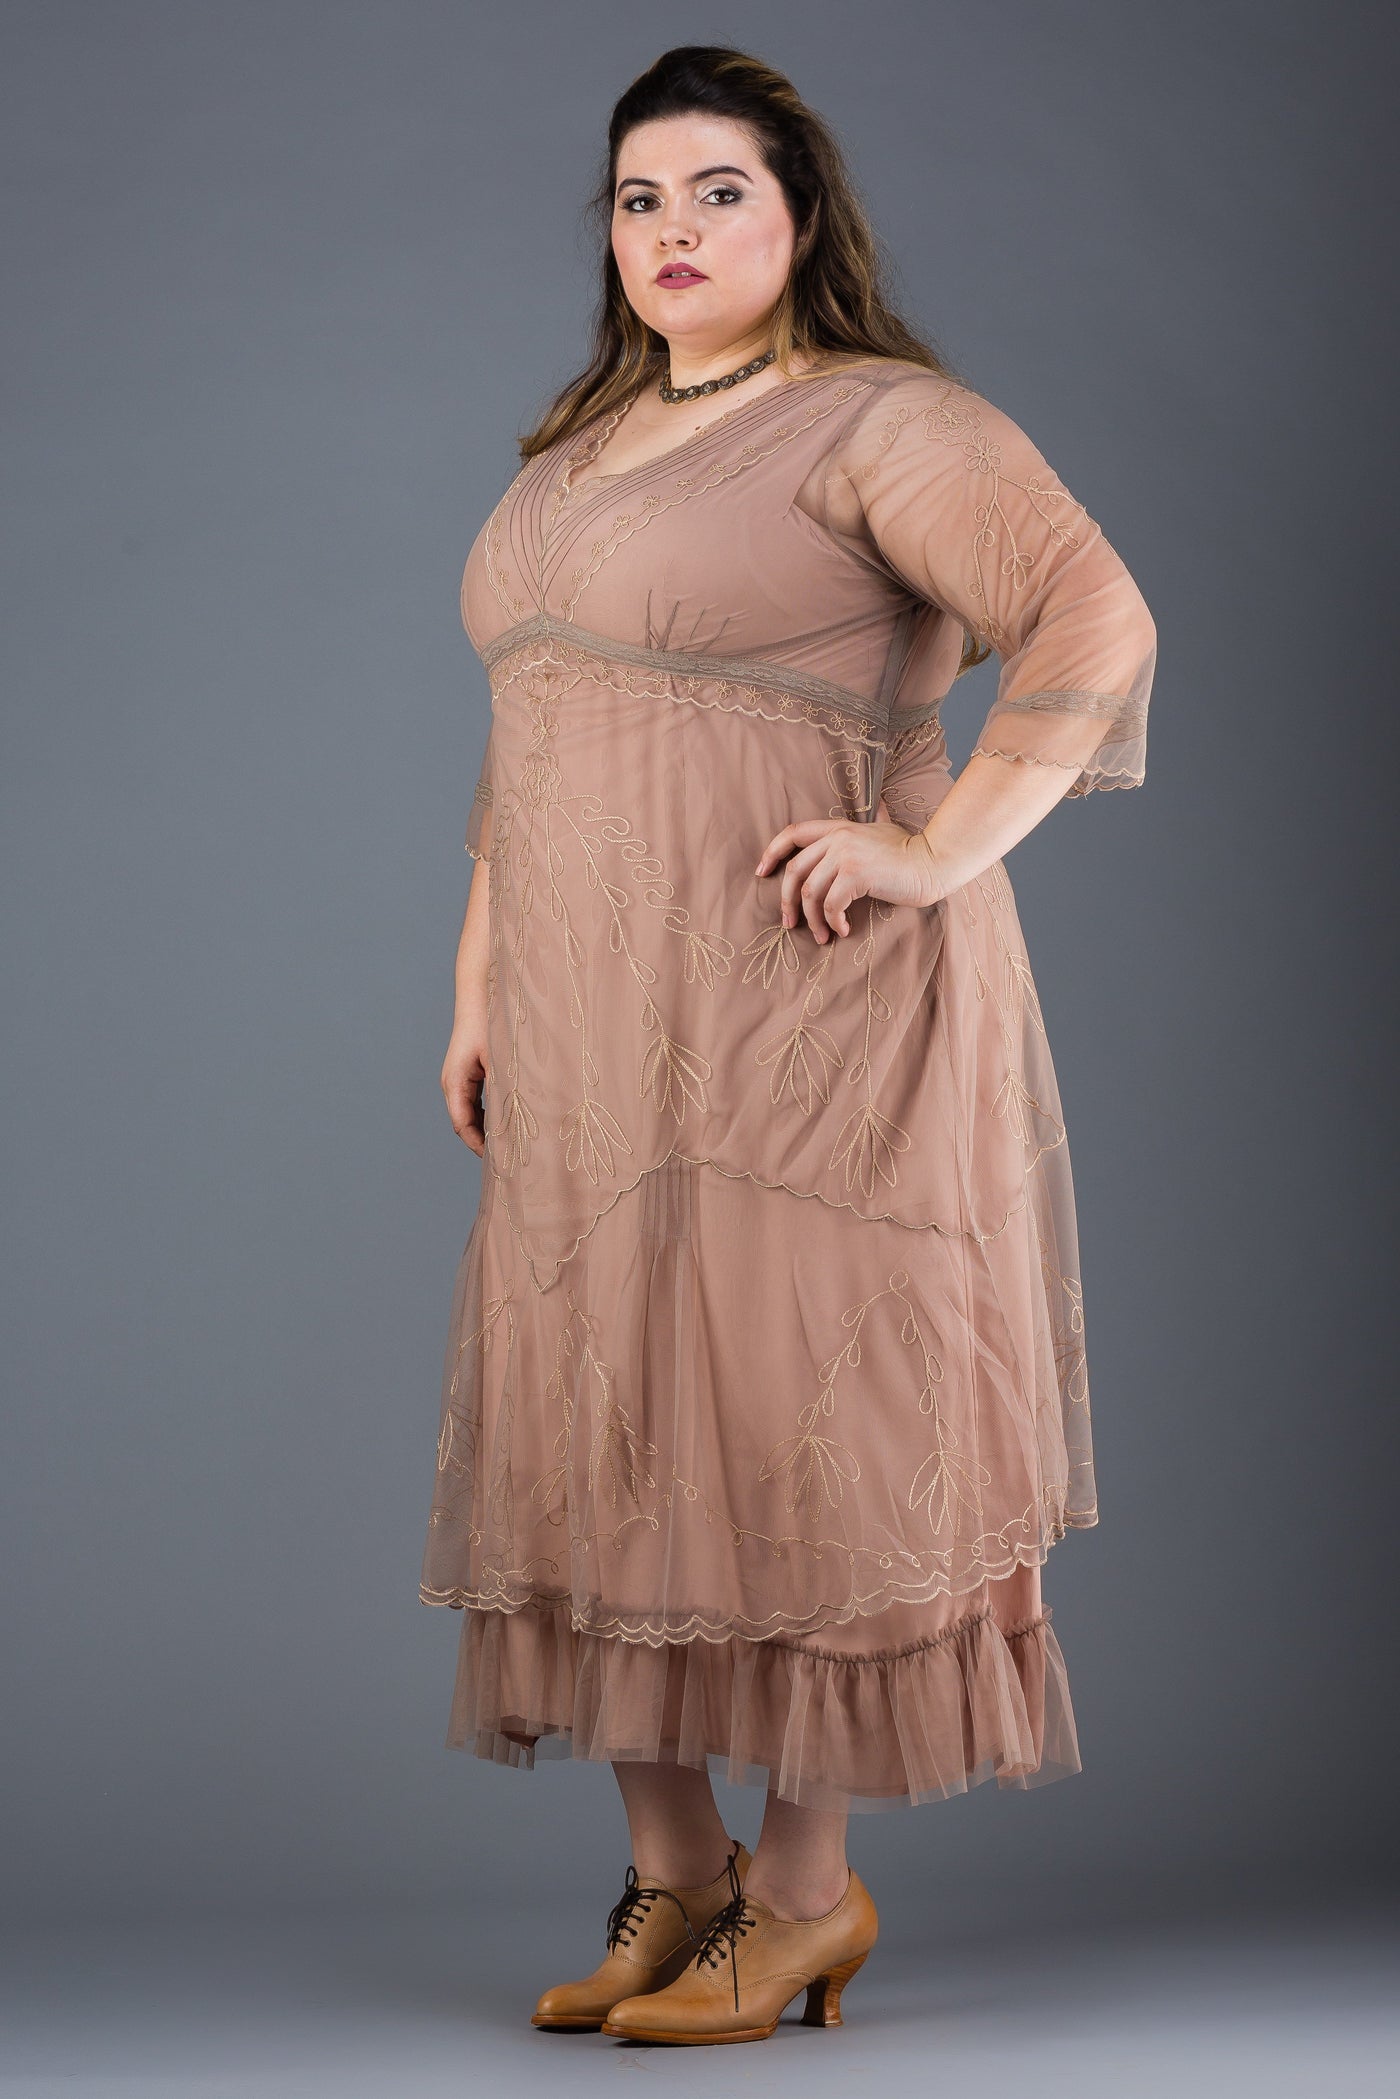 Plus Size Somewhere in Time Dress in Sand by Nataya